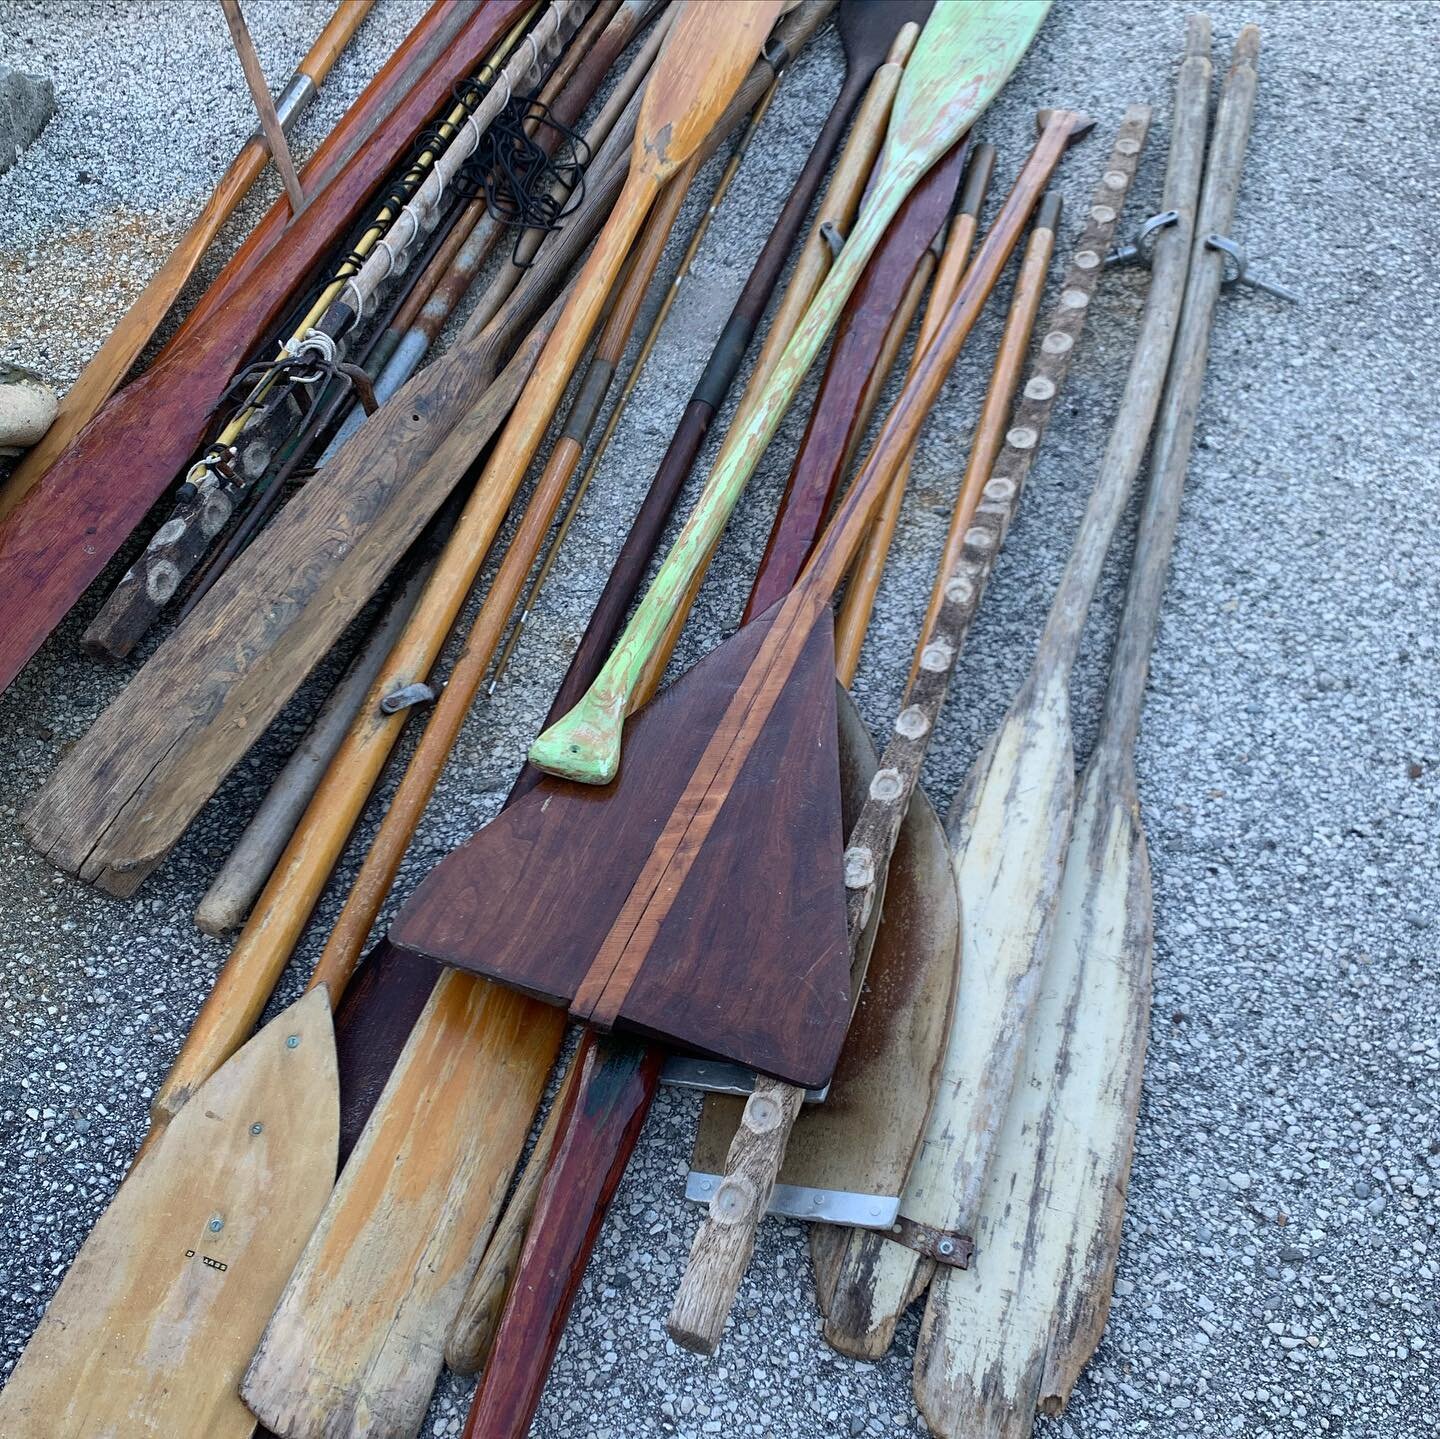 Oars, whale bones, propellers oh my.  Come check us out this Sat 9-5
#vintage #antiques #shoptampa #tampa #visittampa